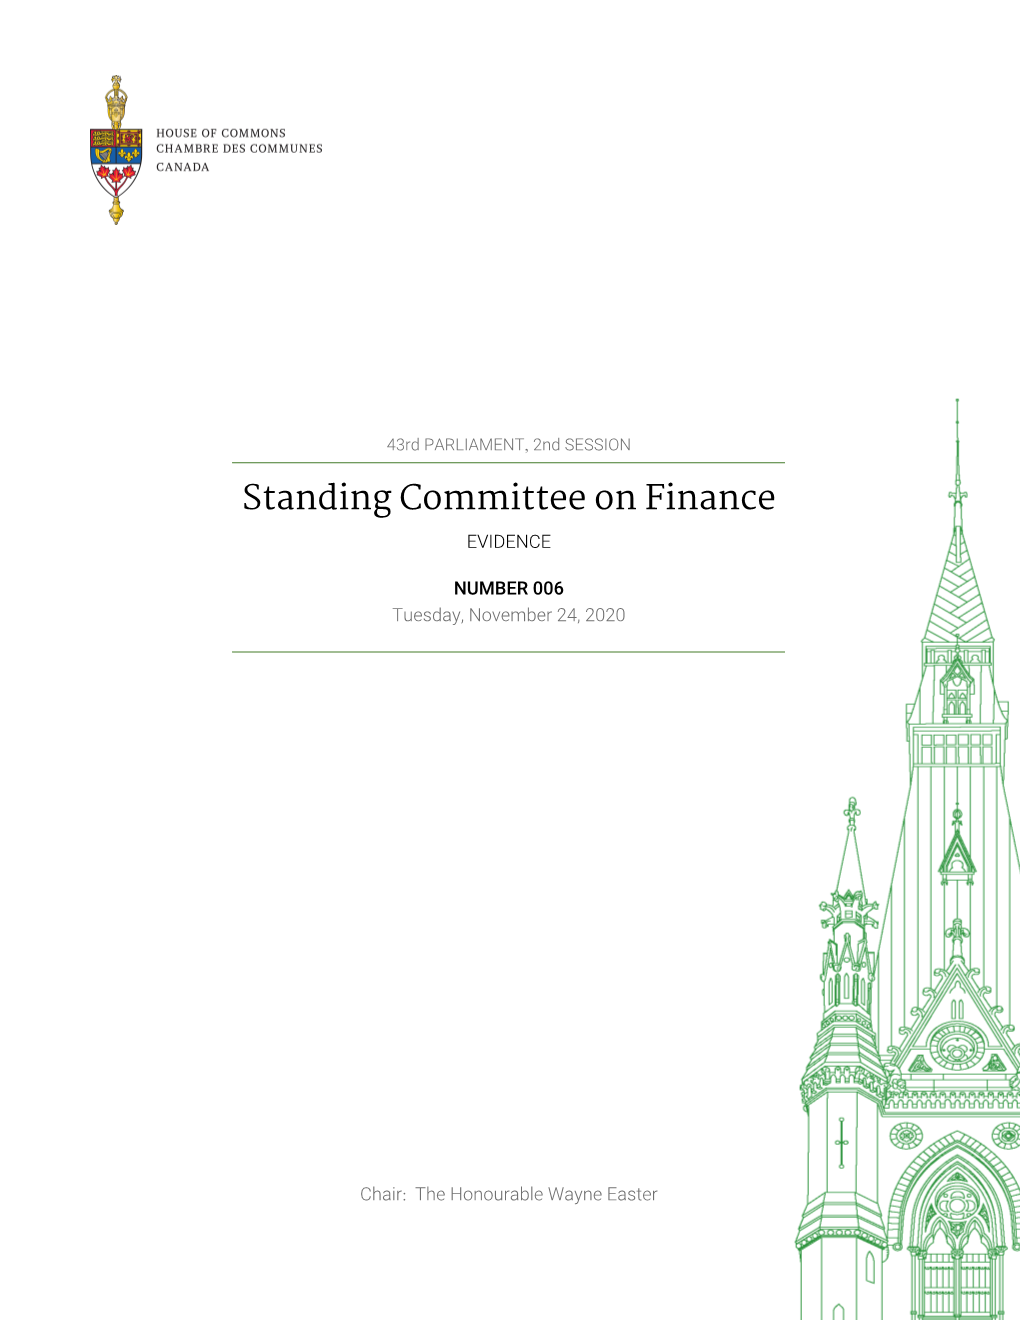 Evidence of the Standing Committee on Finance